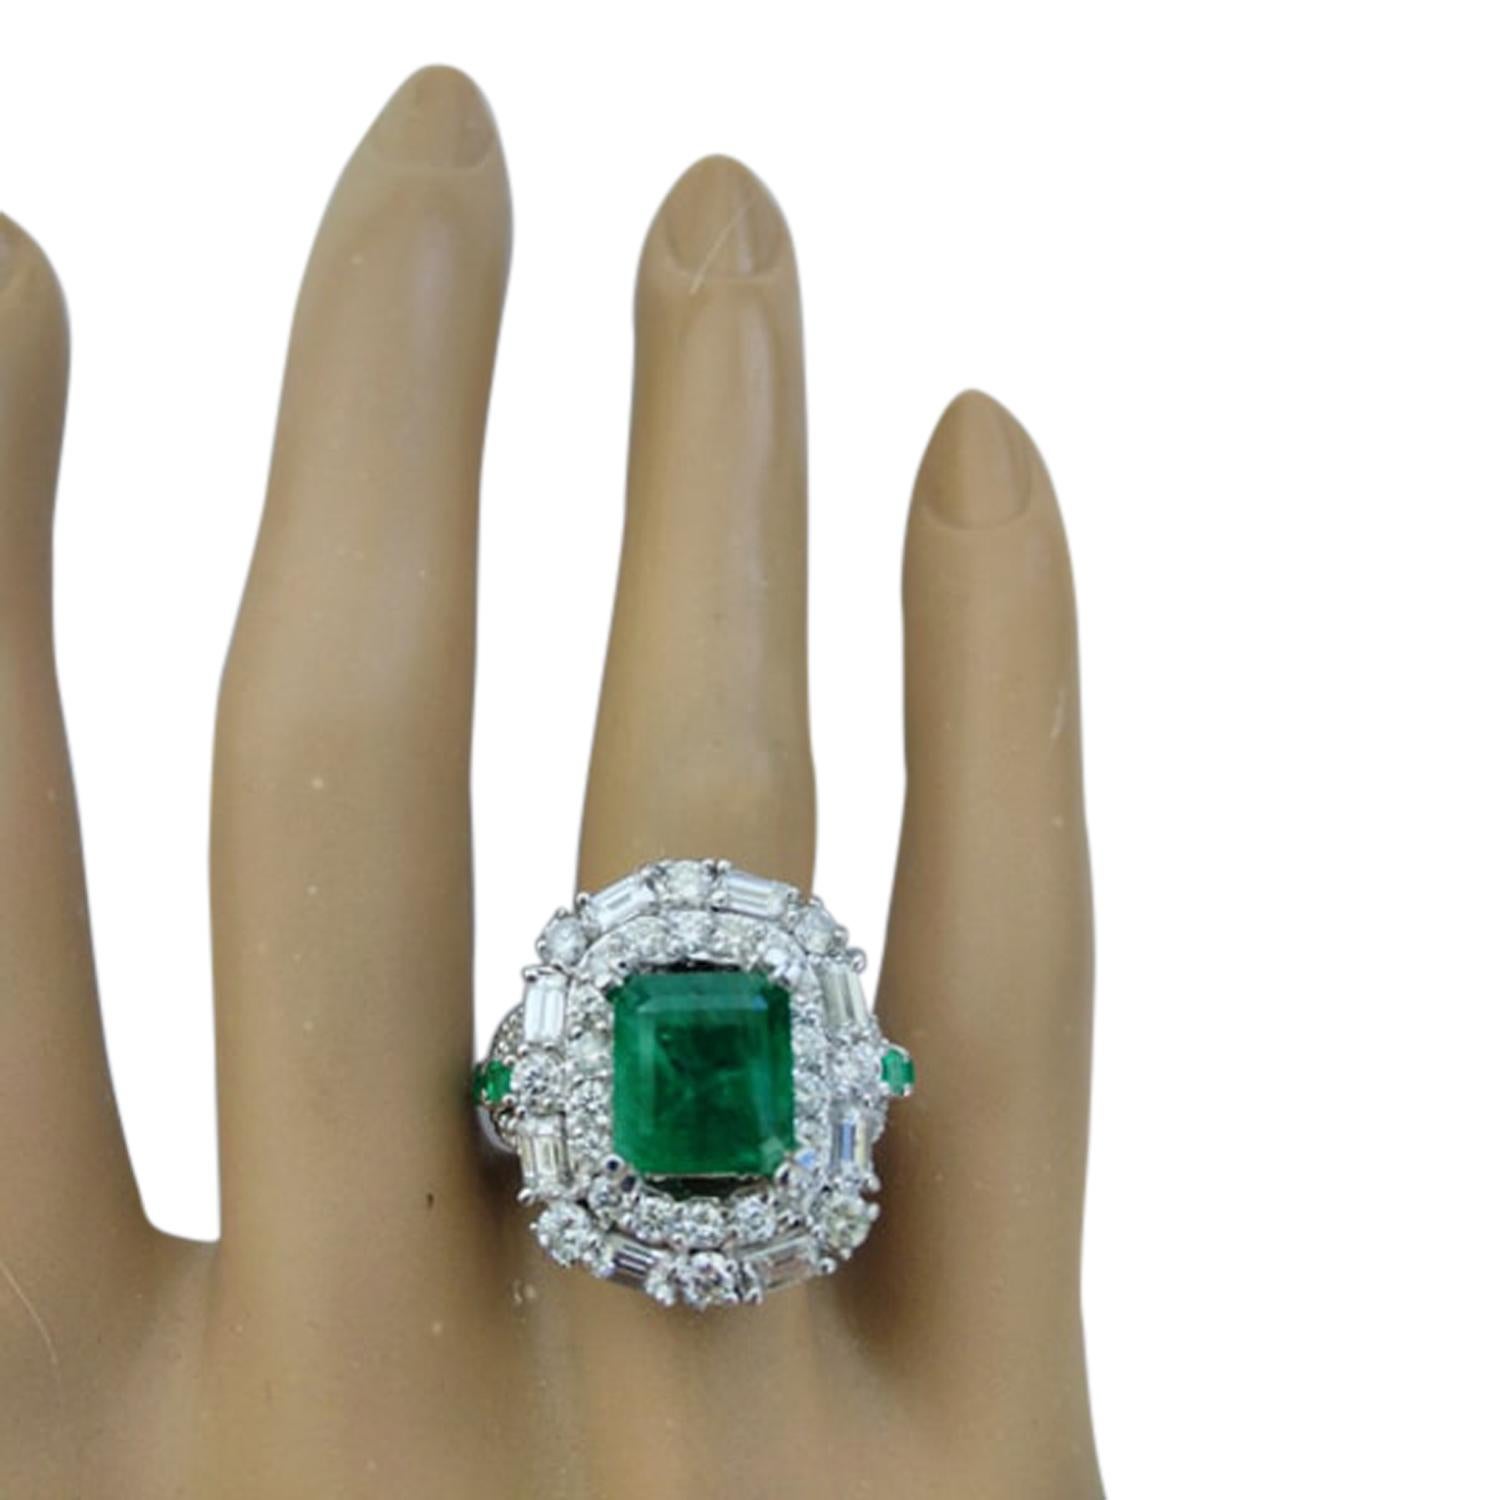 5.50 Carat Natural Emerald 14 Karat Solid White Gold Diamond Ring
Stamped: 14K 
Total Ring Weight: 11.3 Grams 
Center Emerald Weight: 3.10 Carat (10.00x8.00 Millimeters) 
Side Emerald Weight: 0.40 Carats
Diamond Weight: 2.00 Carat (F-G Color,